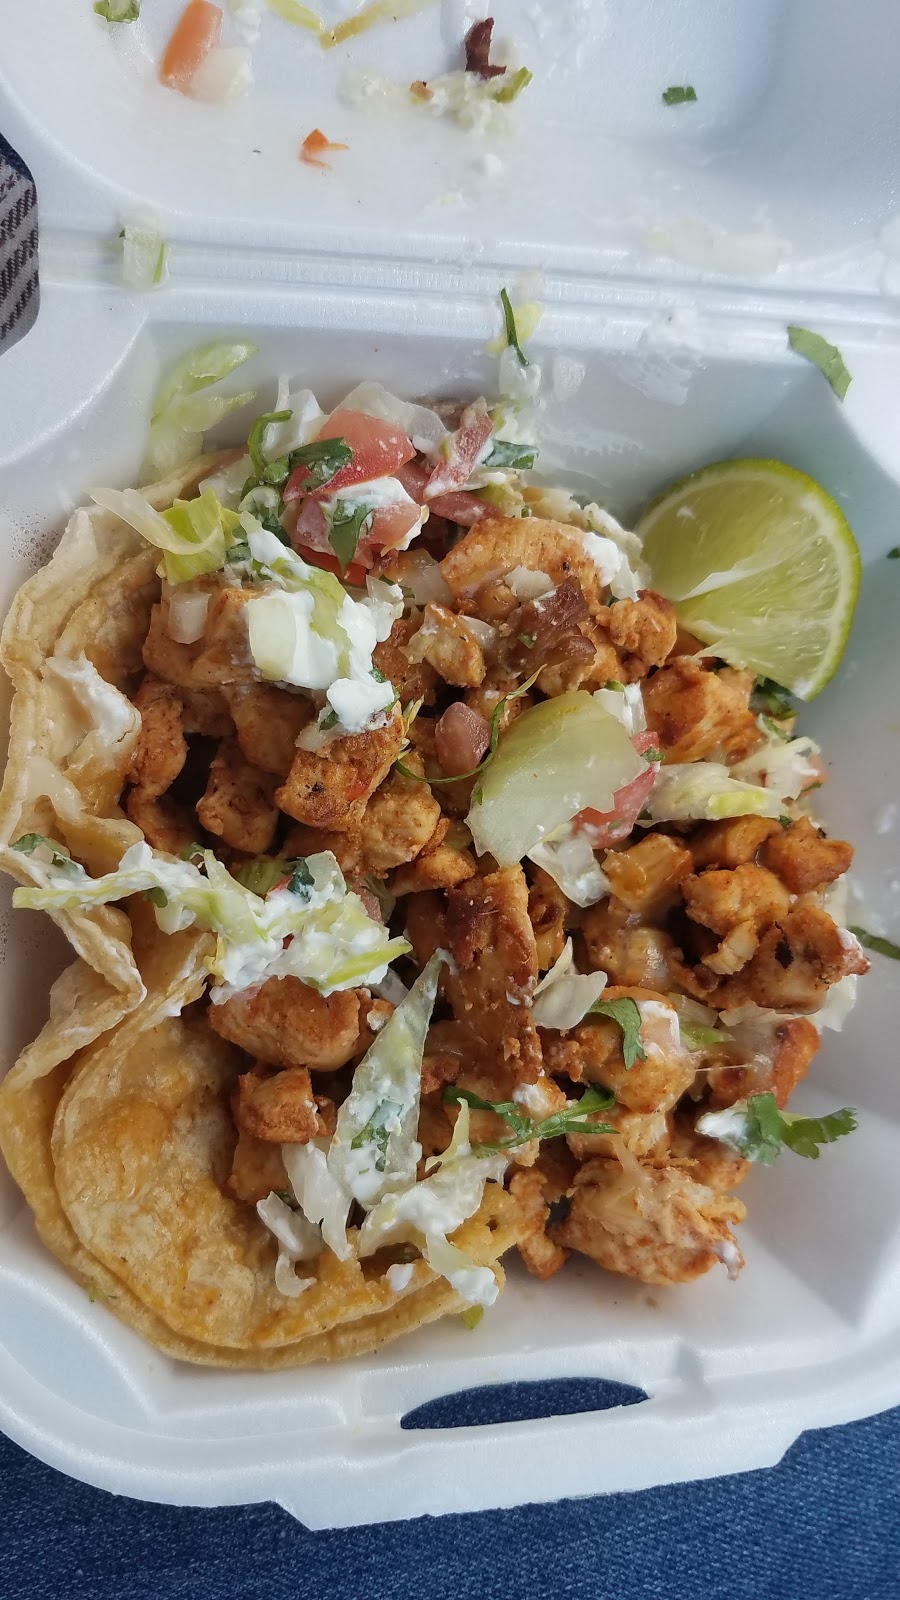 Wichos Tacos | 4715 W 30th St Suite F & G, Indianapolis, IN 46222 | Phone: (317) 602-6705